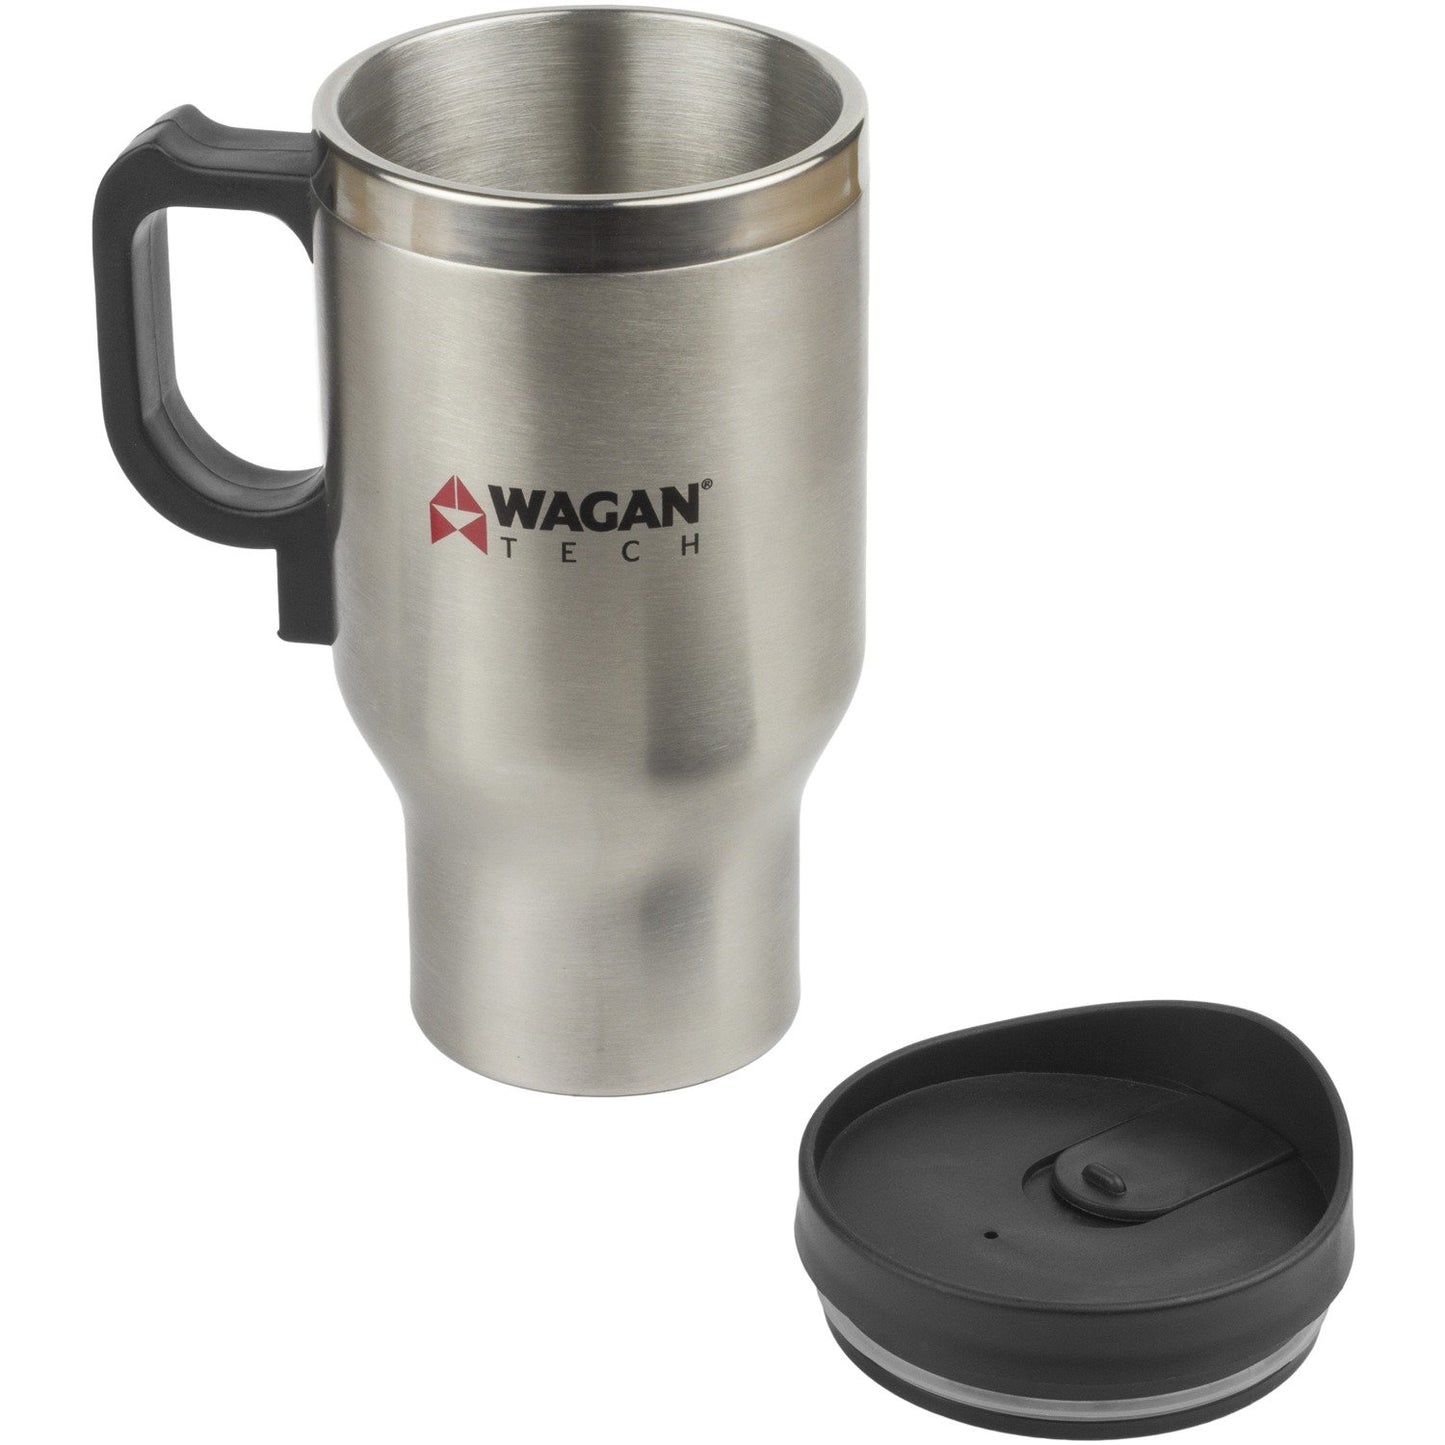 Wagan Tech 6100 12-Volt Deluxe Double-Wall Stainless Steel Heated Travel Mug